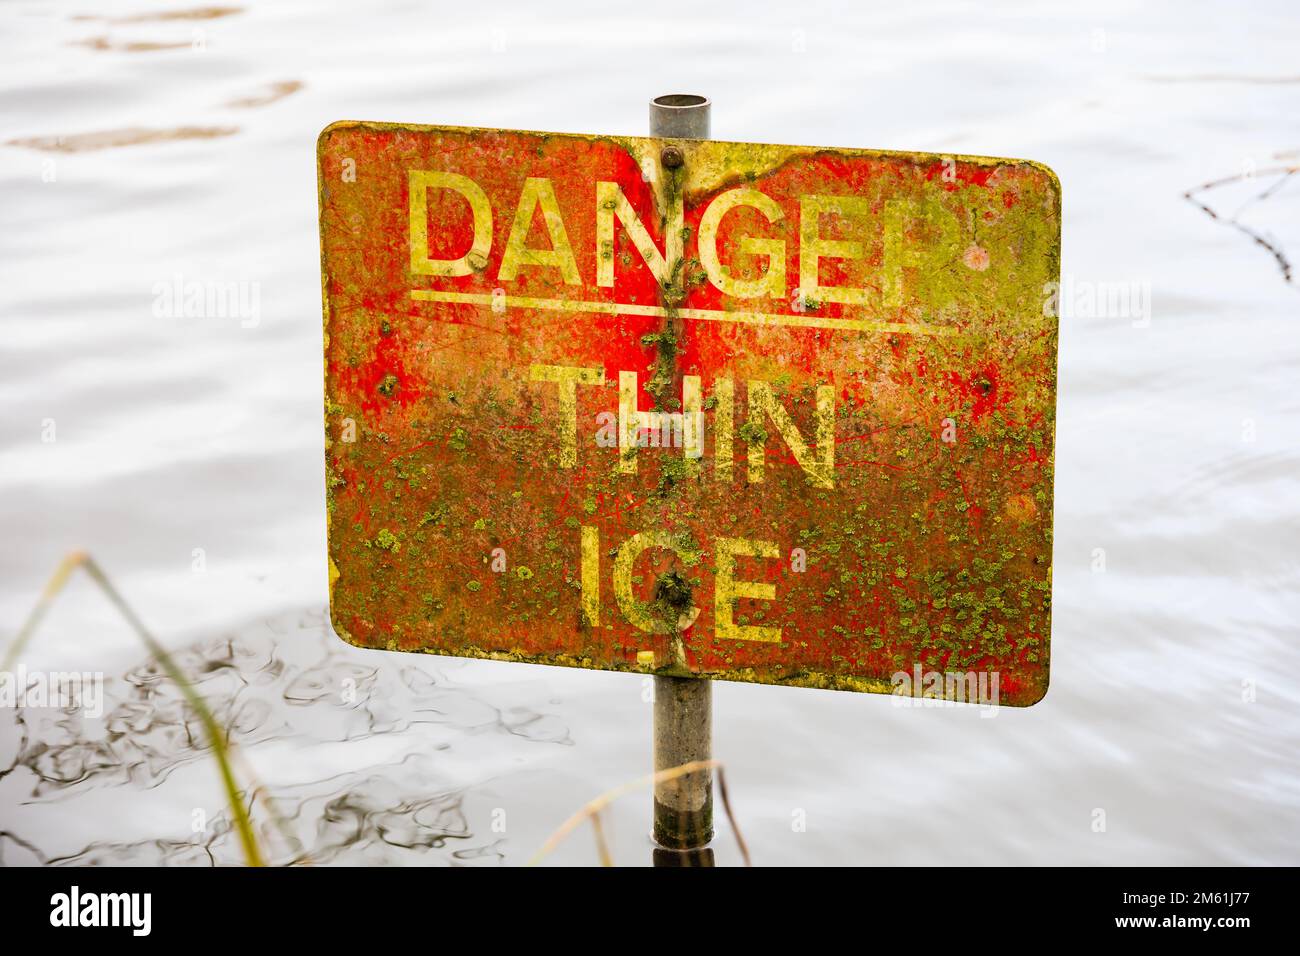 'Danger thin ice' warning sign in water. The sign is faded and has a covering of lichen moss. Stock Photo